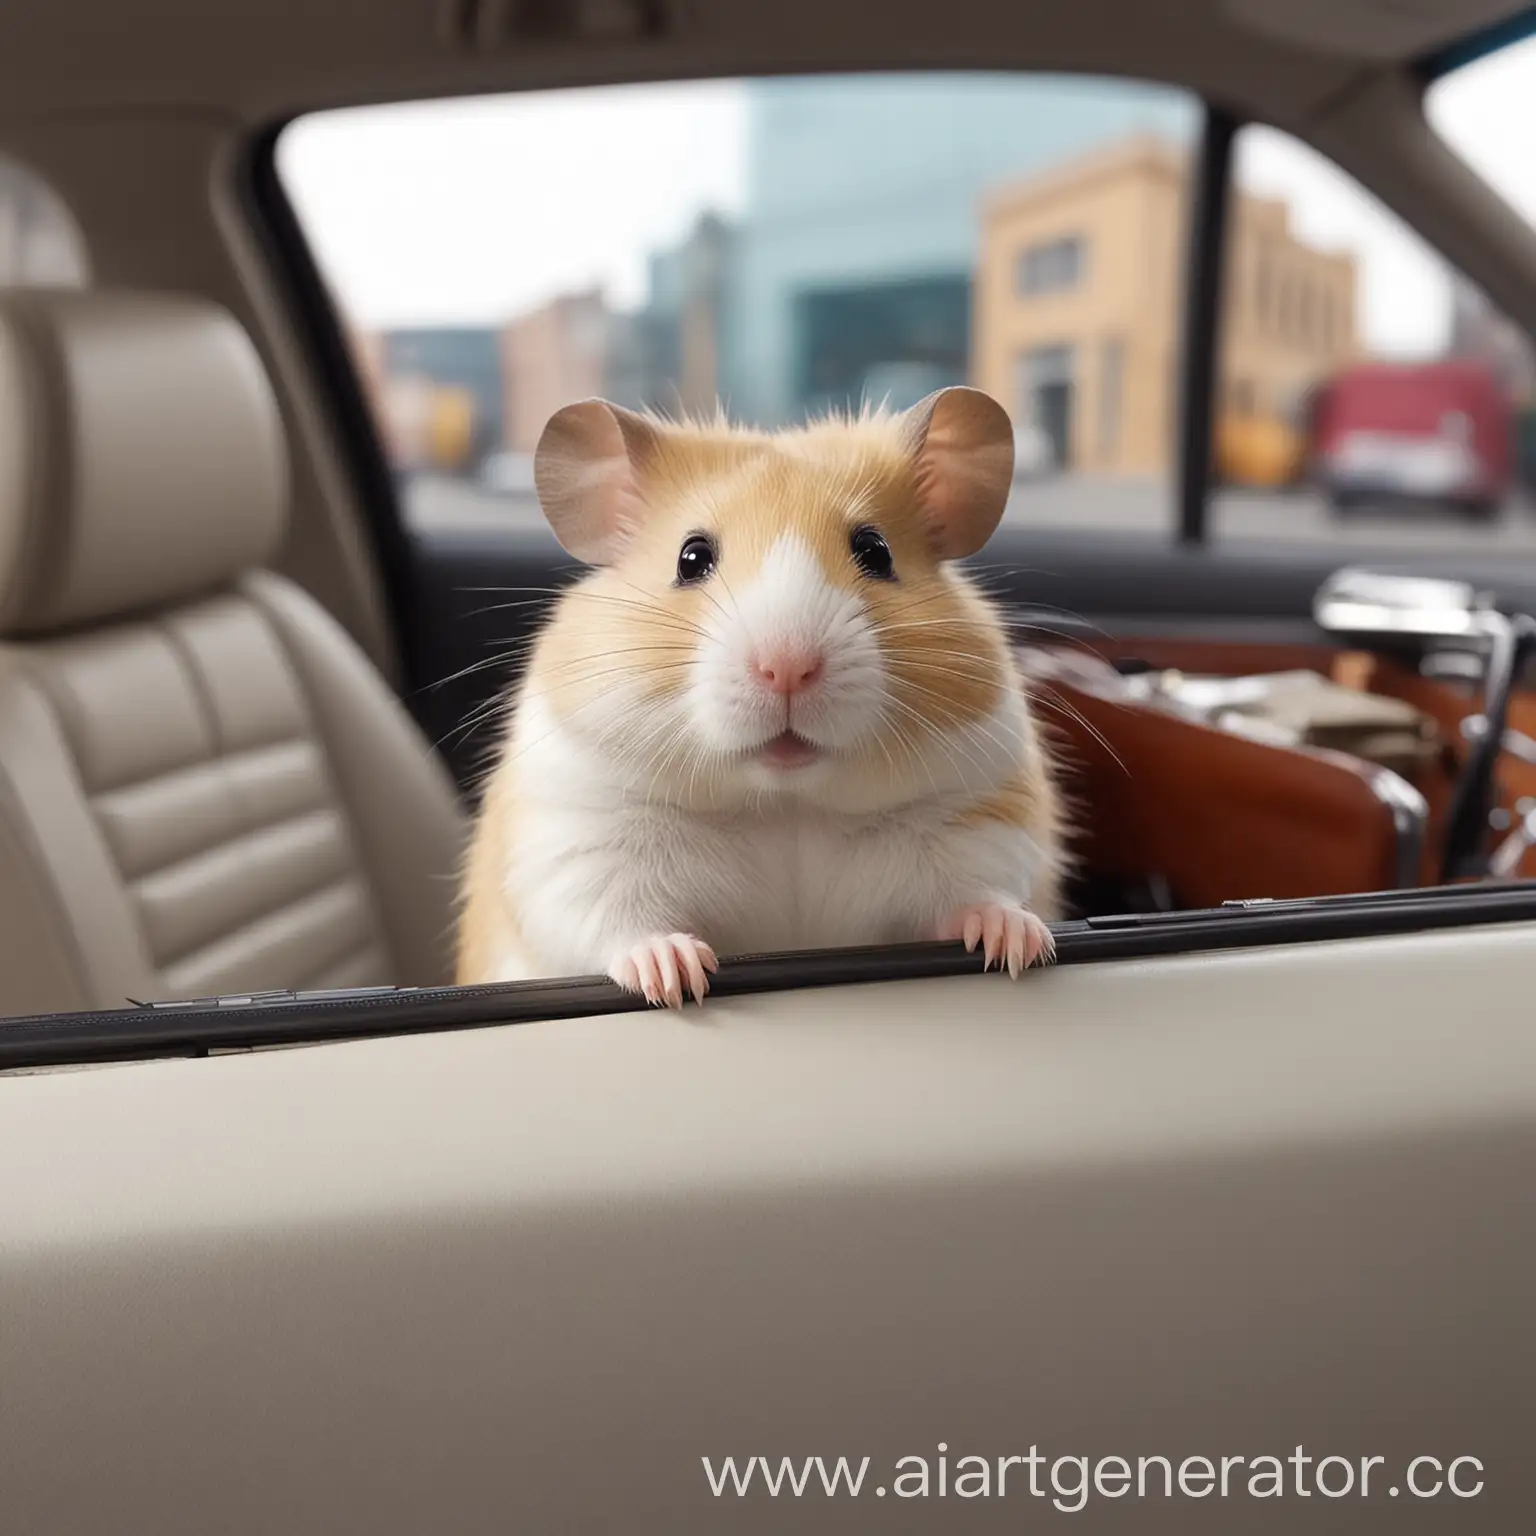 Blatnoy-Hamster-Attends-Business-Meeting-in-Luxurious-Car